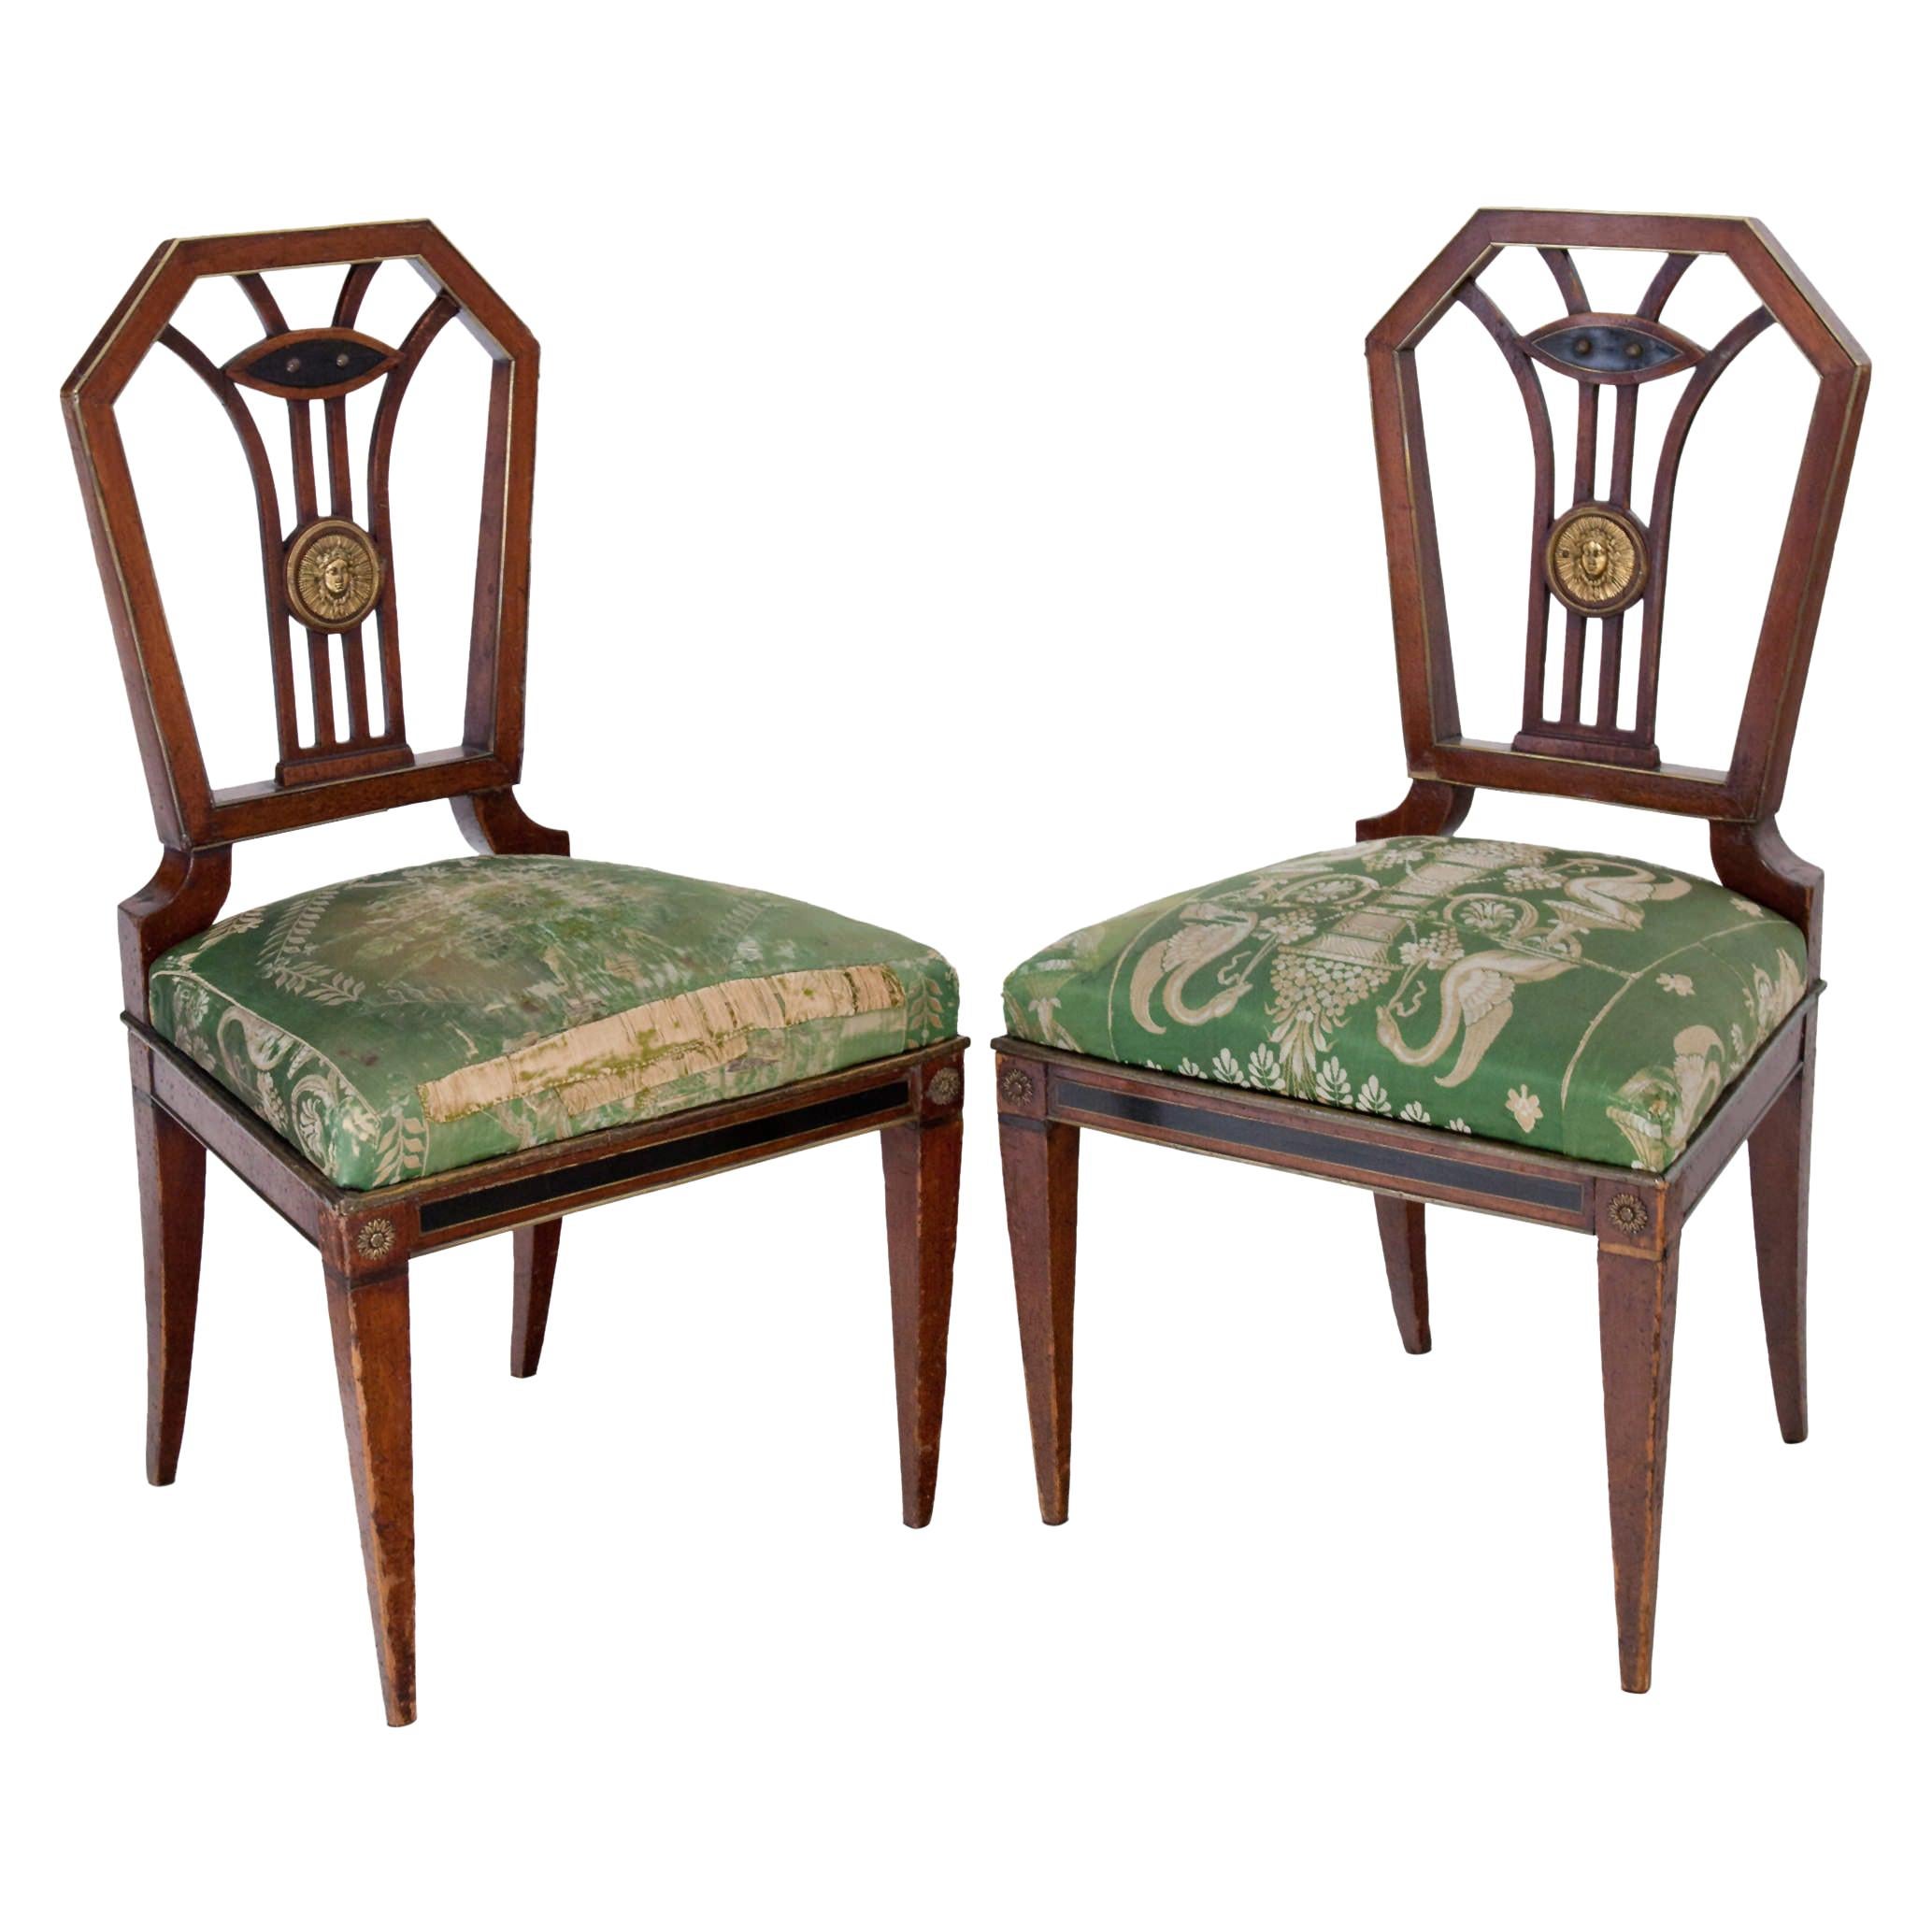 Neoclassical Chairs, probably G. A. Pohle, Vienna, circa 1805-1810